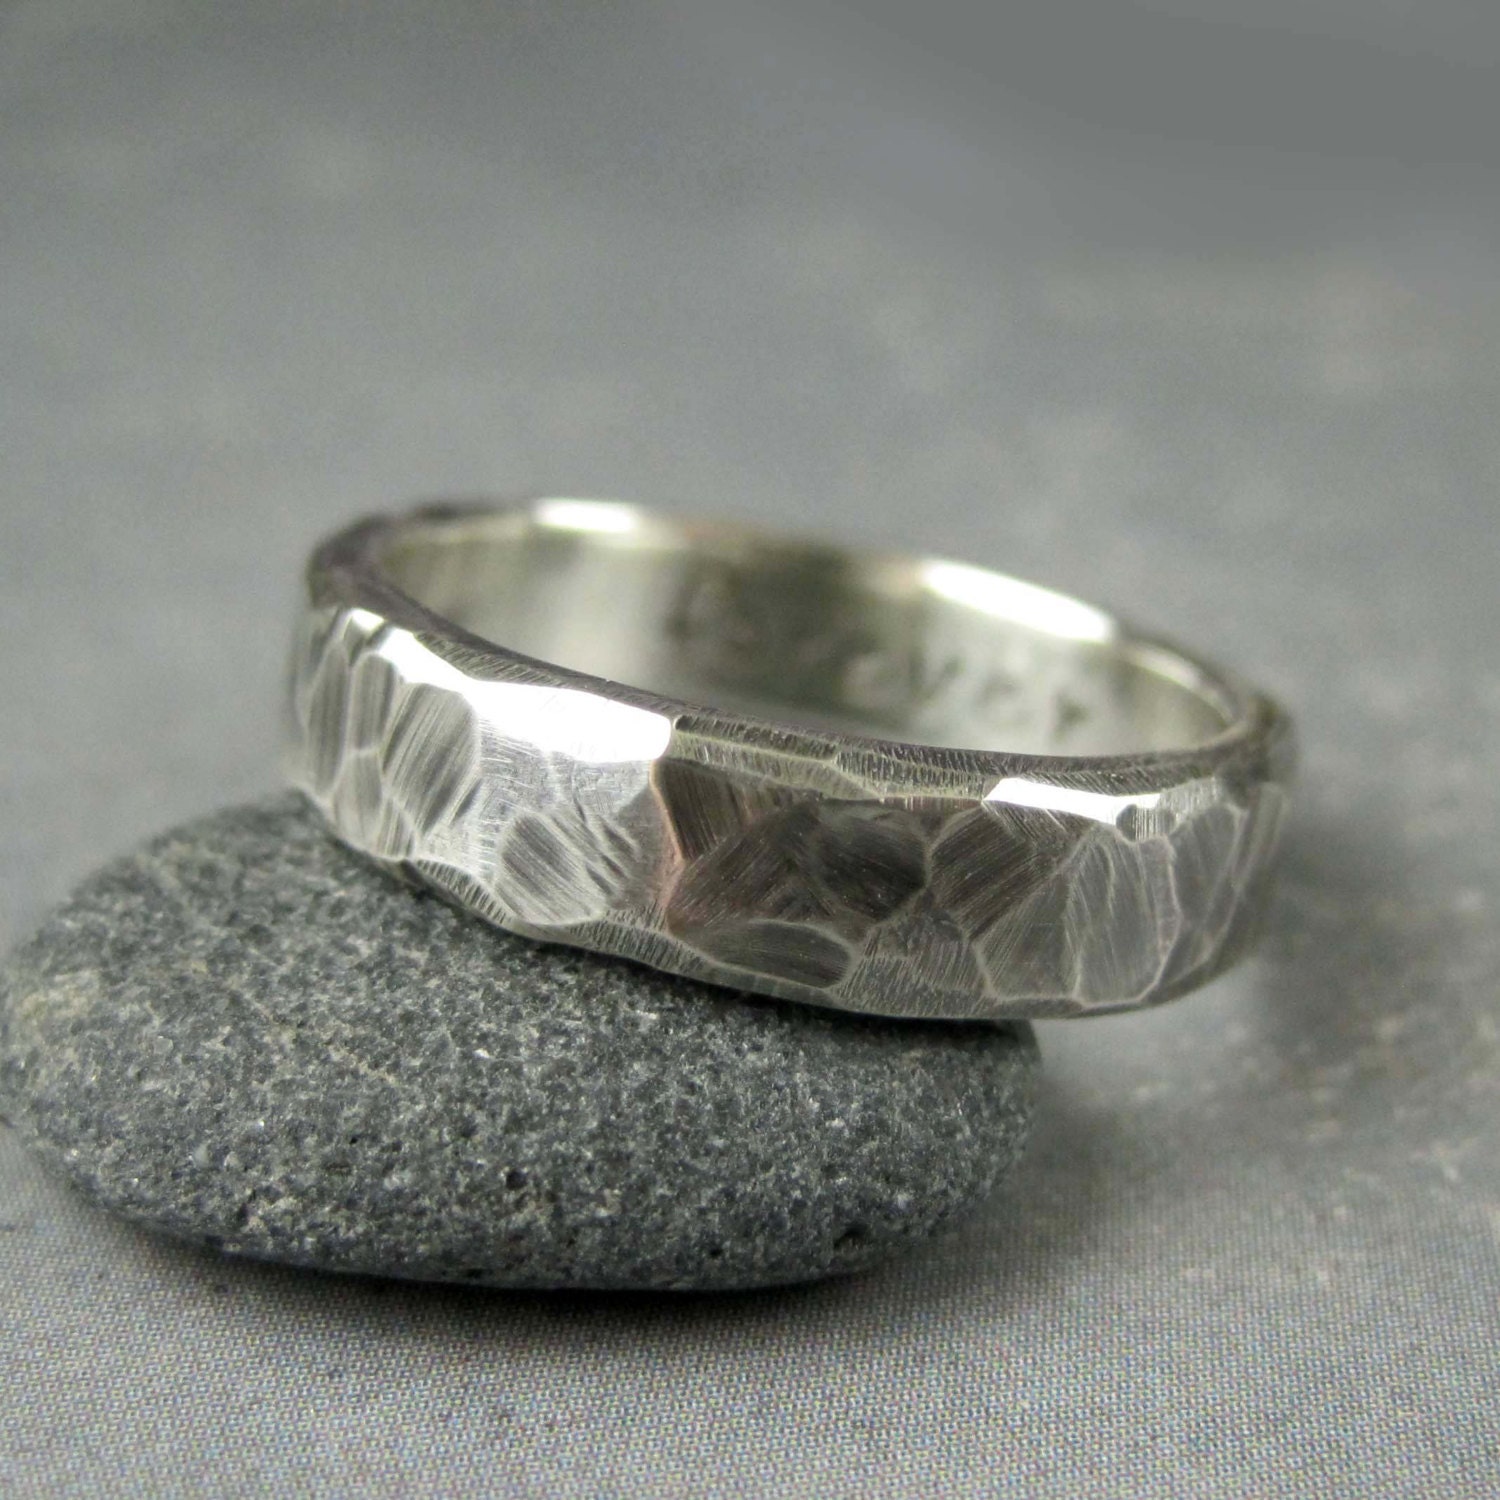 Personalized rustic wedding ring custom engraved Rough hewn